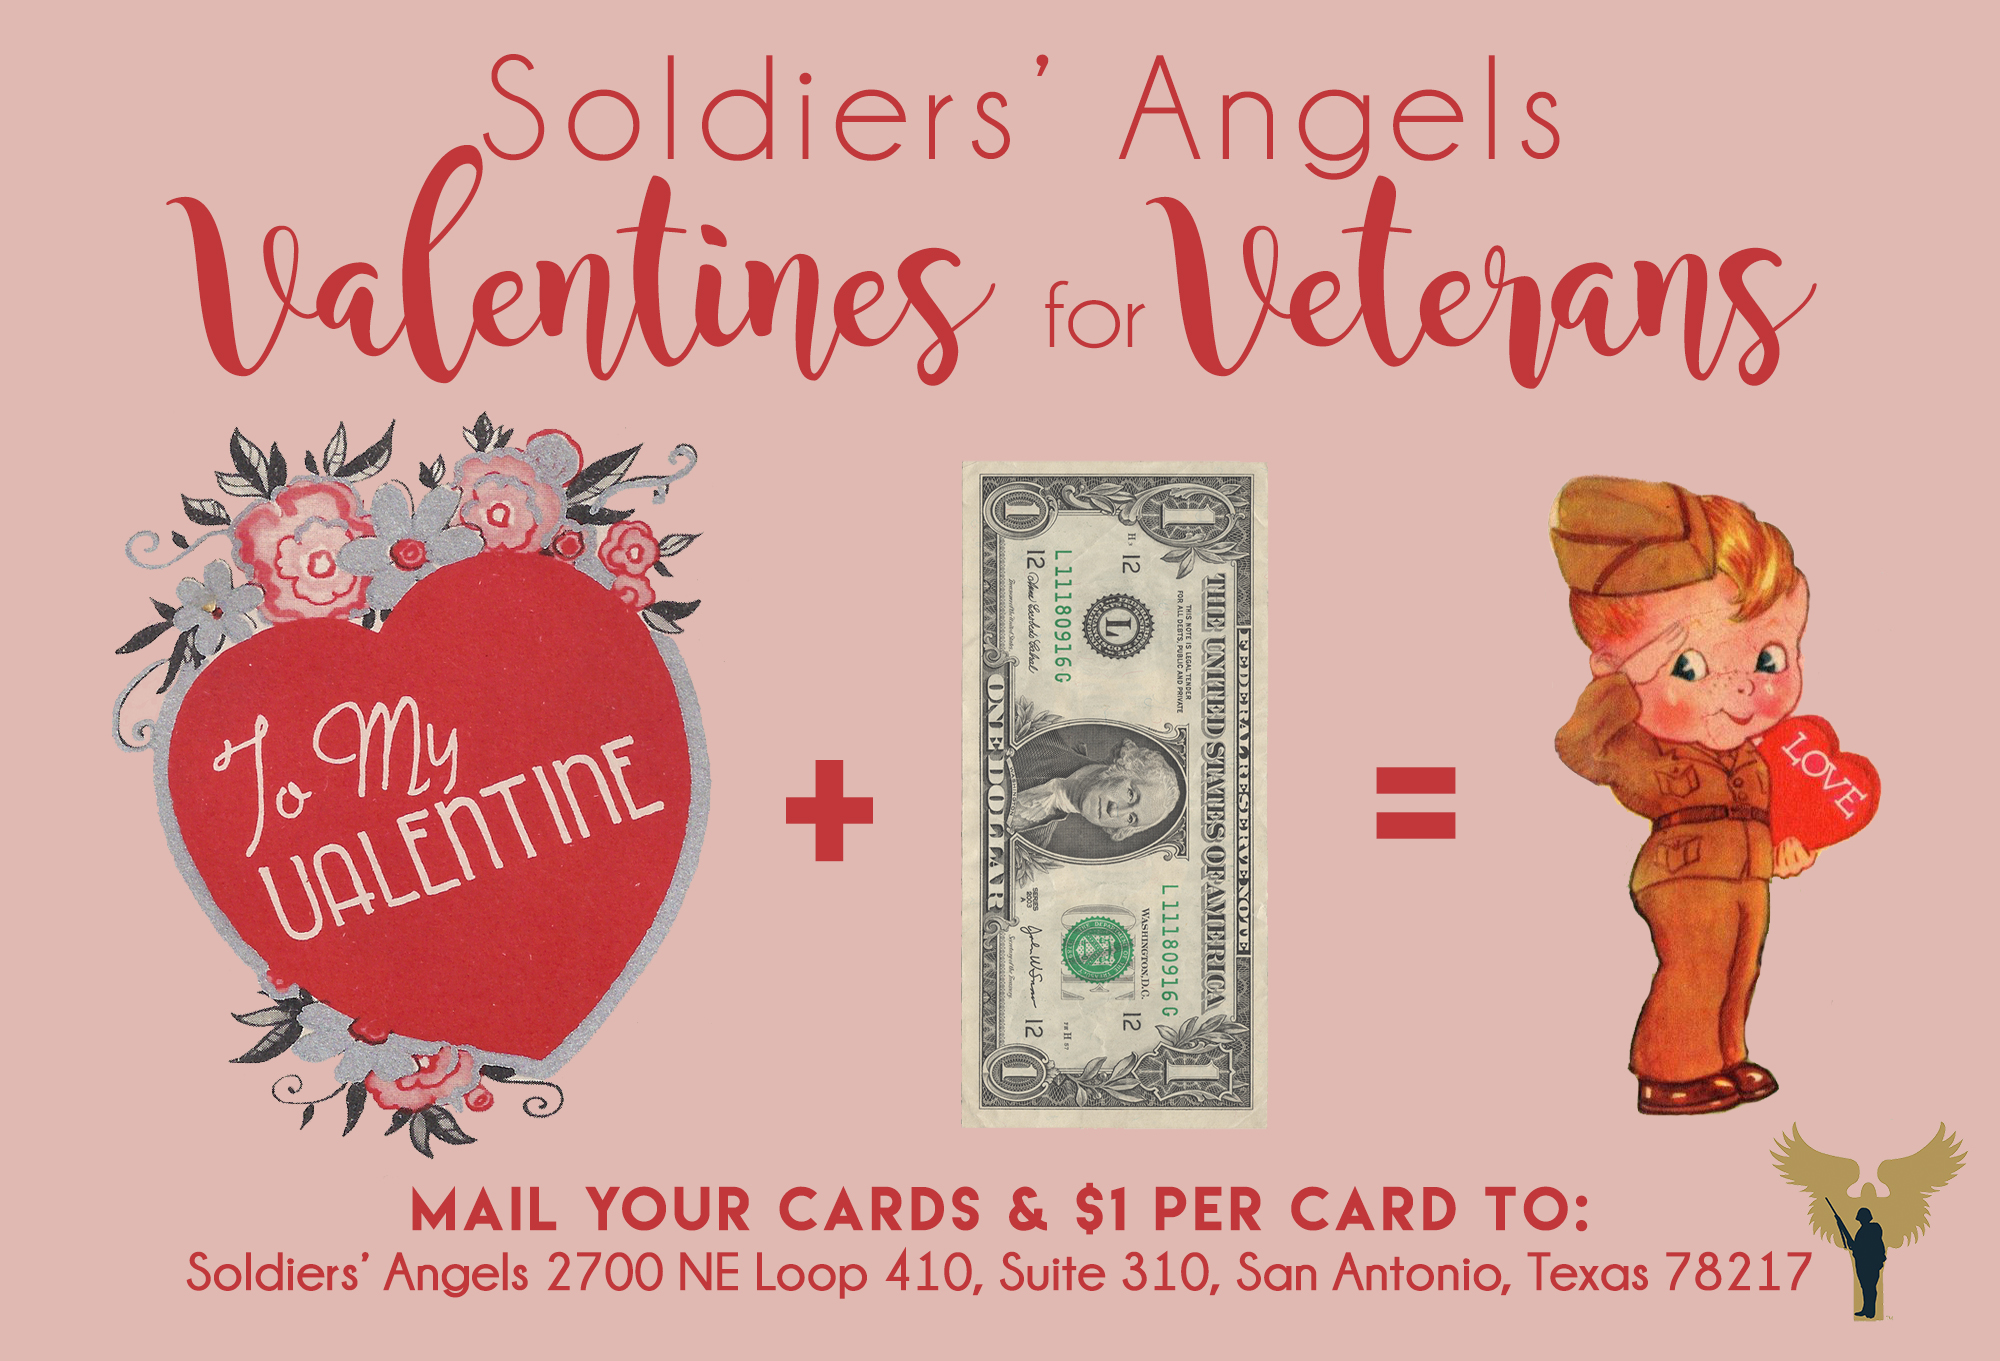 send-our-troops-and-veterans-valentines-this-valentine-s-day-soldiers